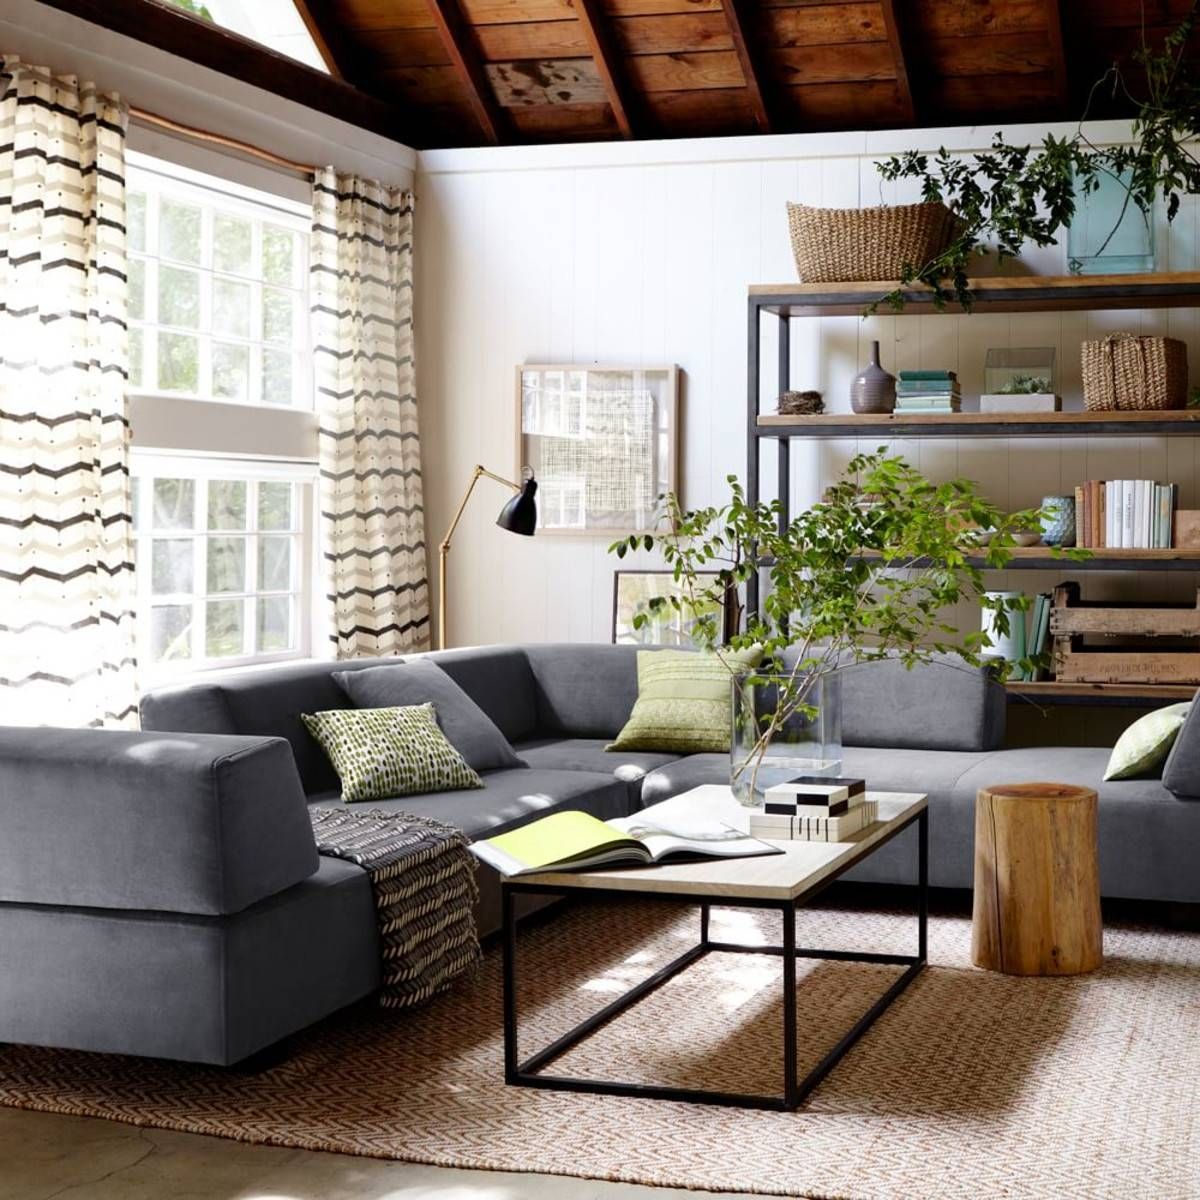 Furniture: West Elm Henry Sectional Reviews | Tillary Sofa | West Pertaining To West Elm Henry Sectional Sofas (View 13 of 15)